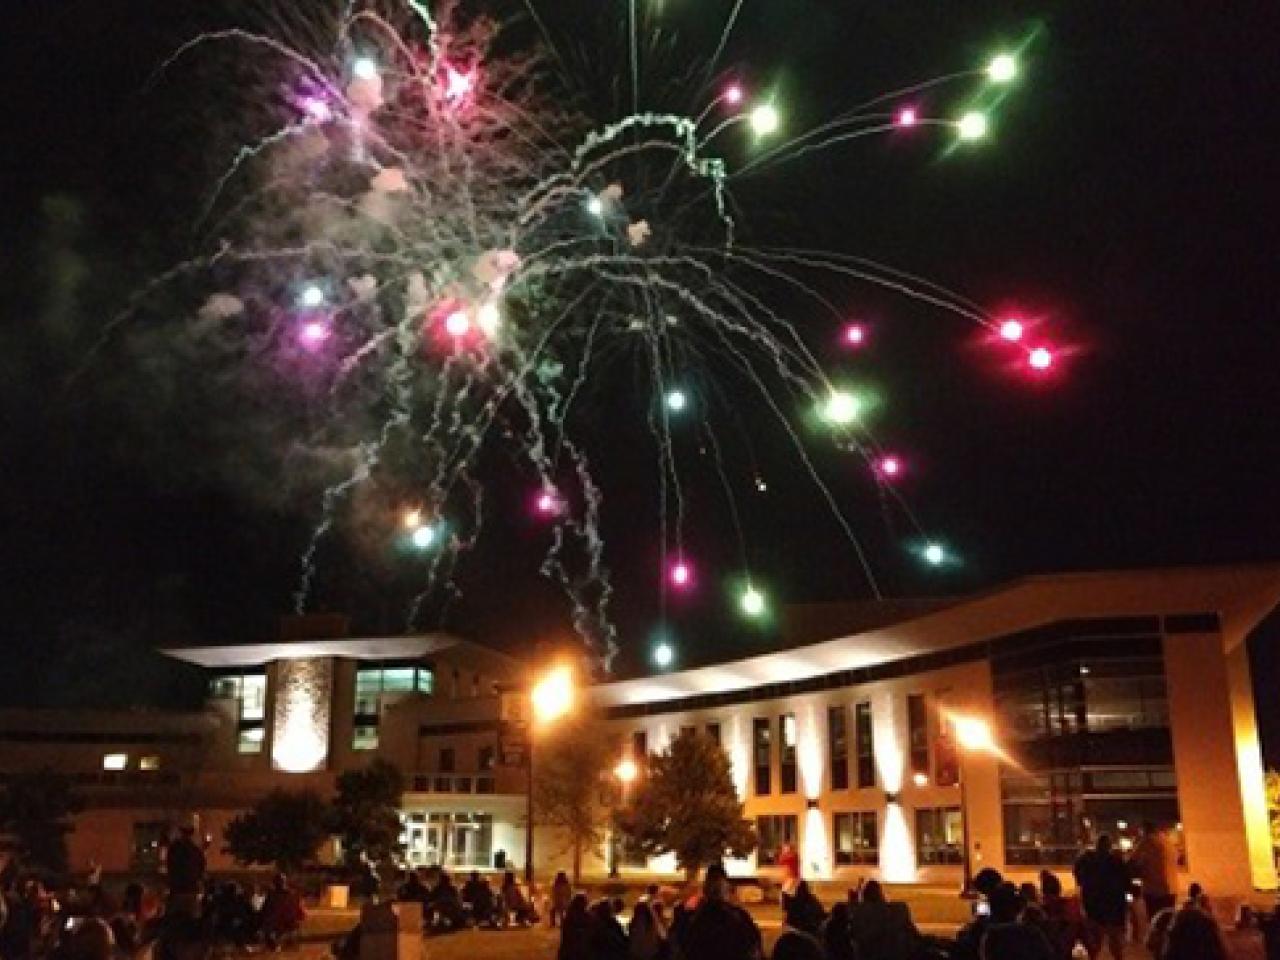 Fireworks exploding over the Newark Campus